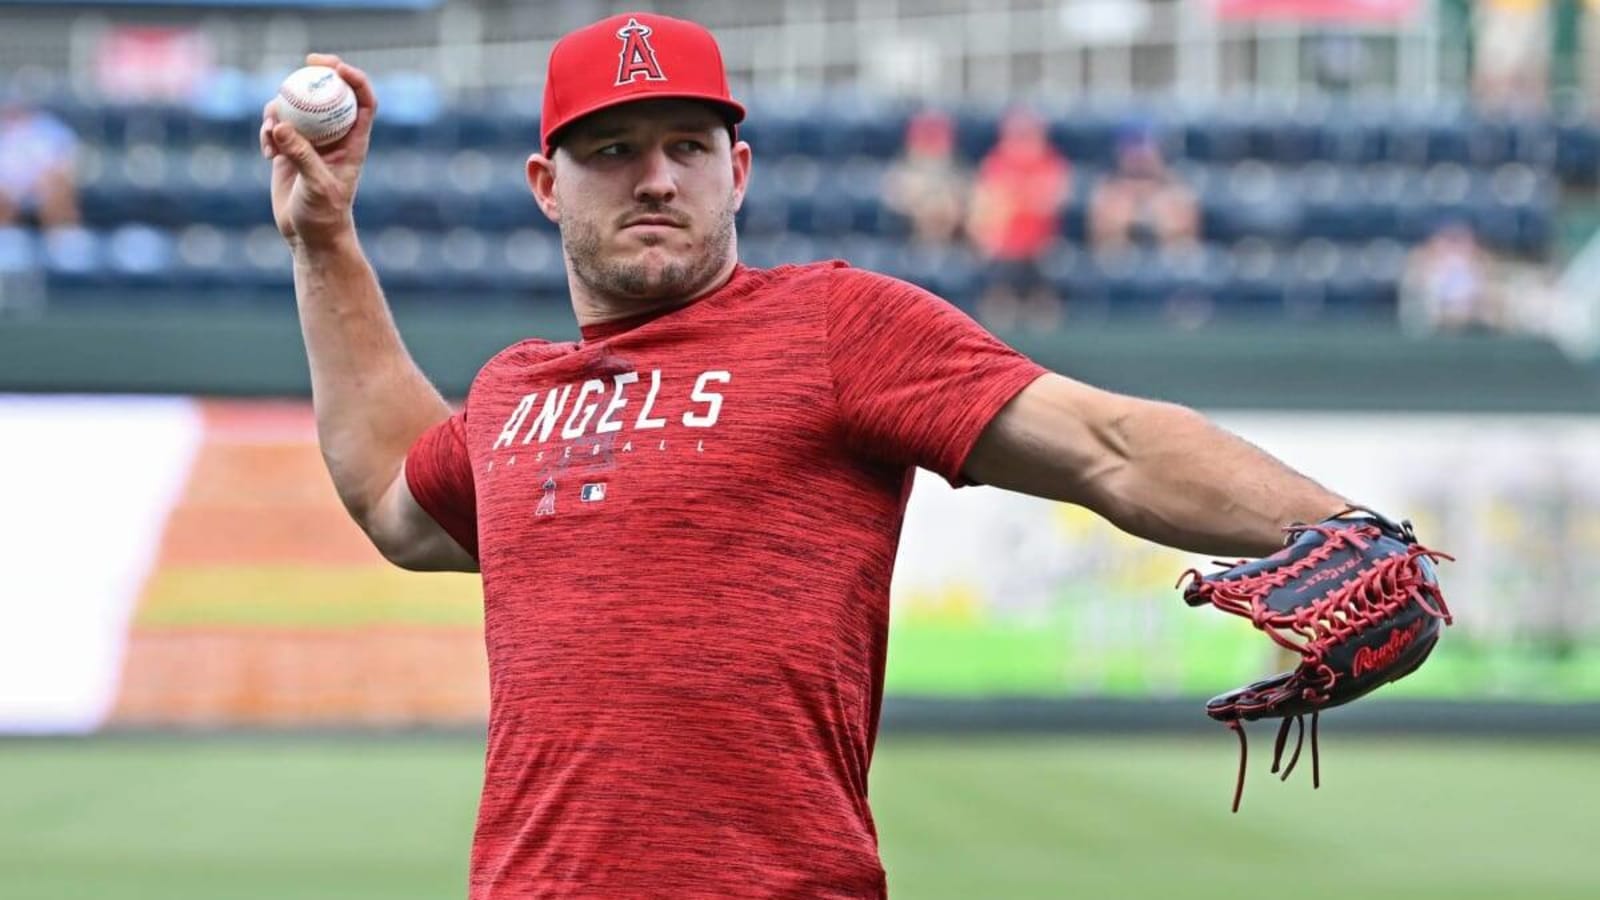  Injury Updates on Mike Trout, Mike Moustakas, Chase Silseth and More